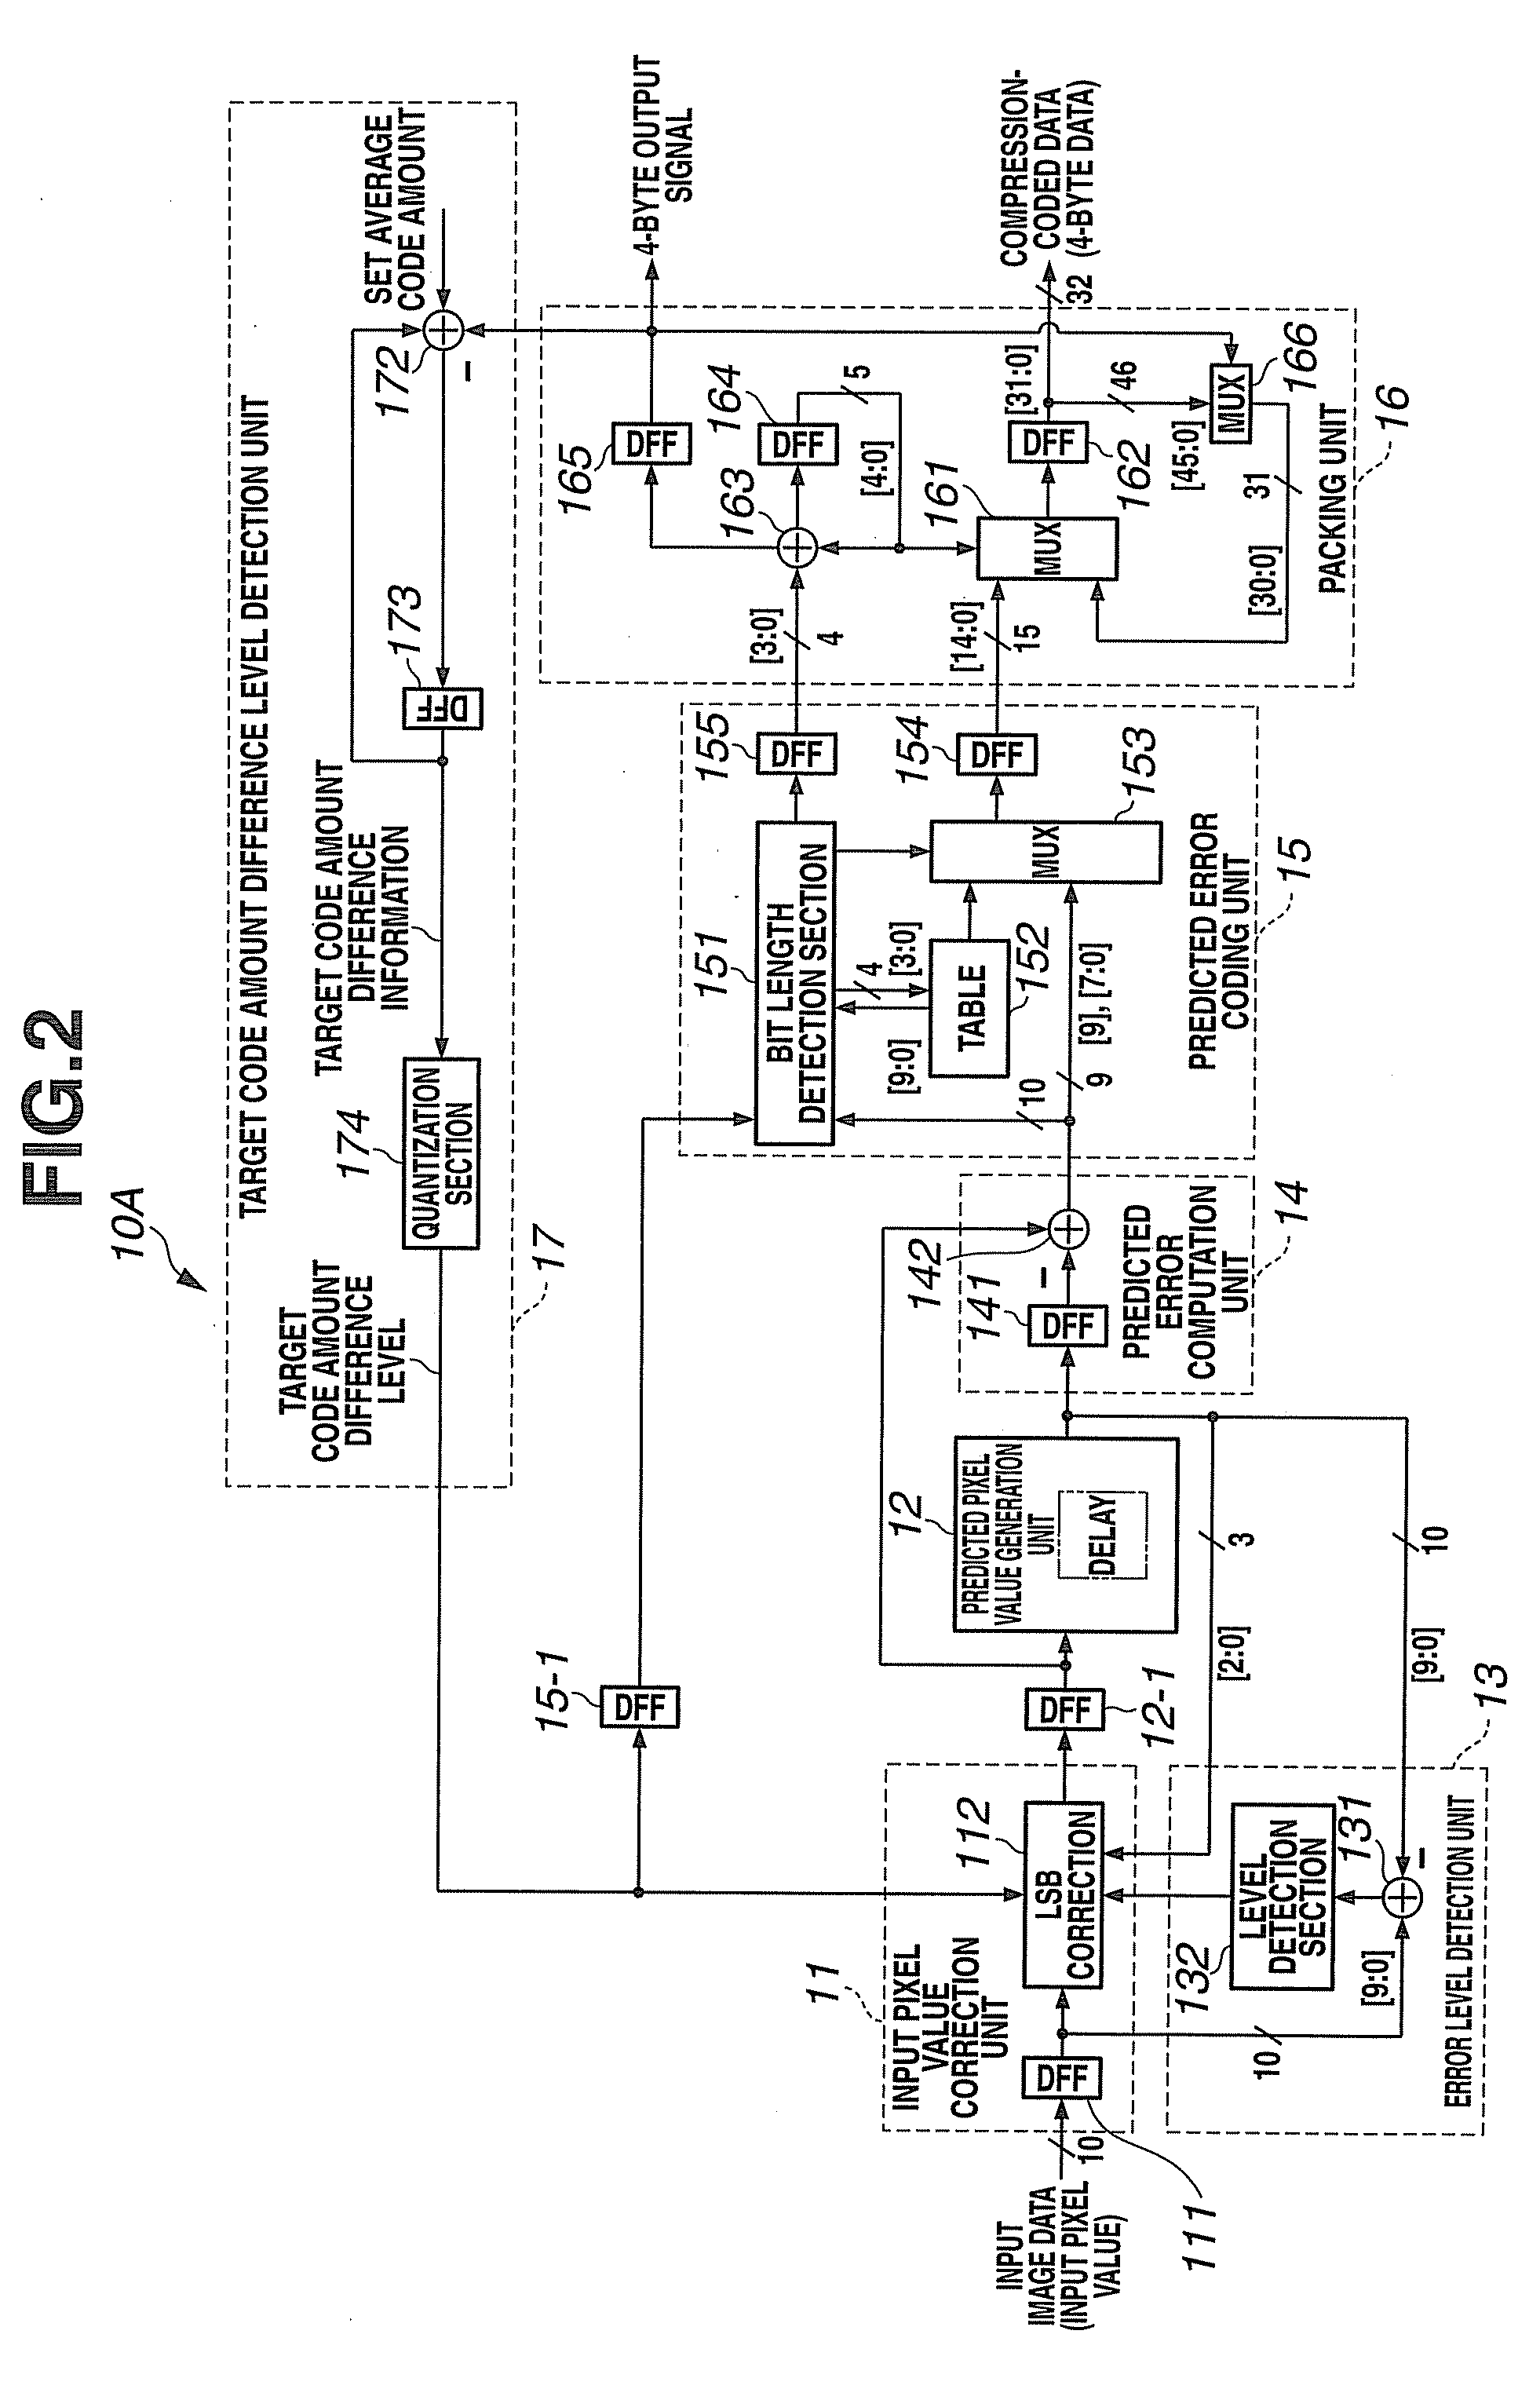 Image compressor, image expander and image processing apparatus